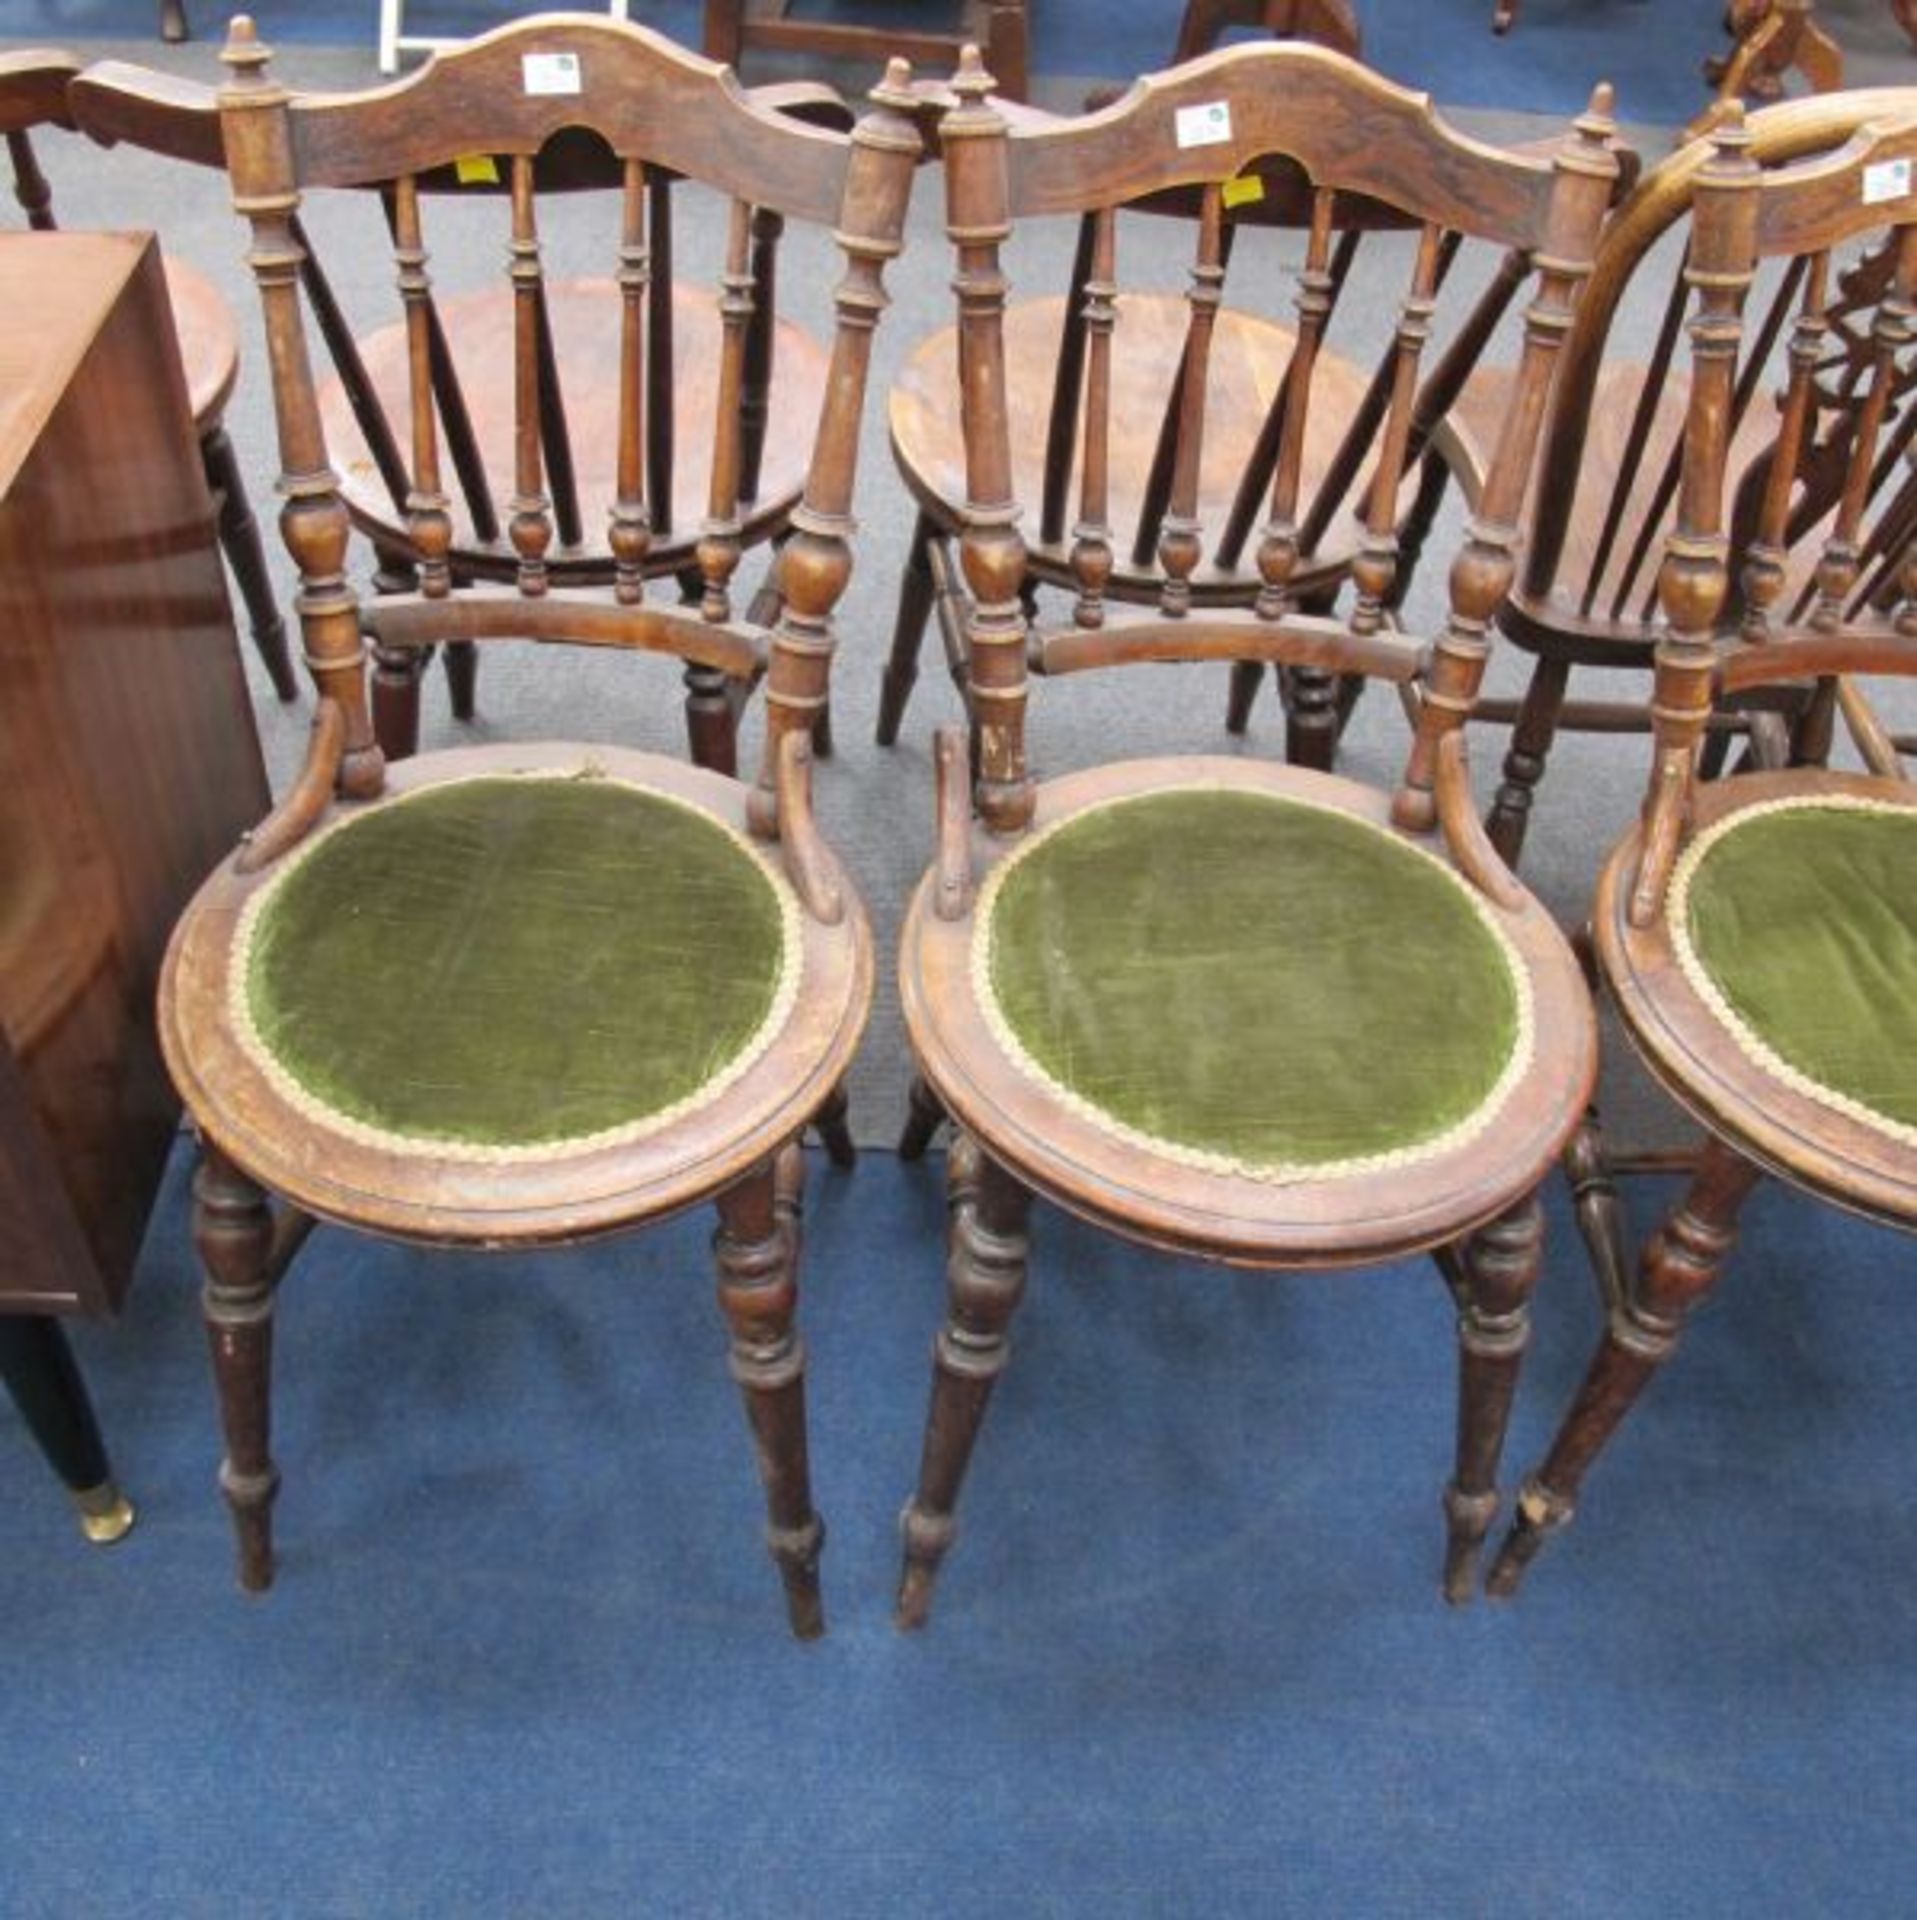 A Set of Three Late Victorian Ornate Spindle Back Single Chairs; An Edwardian Nursing Chair and a